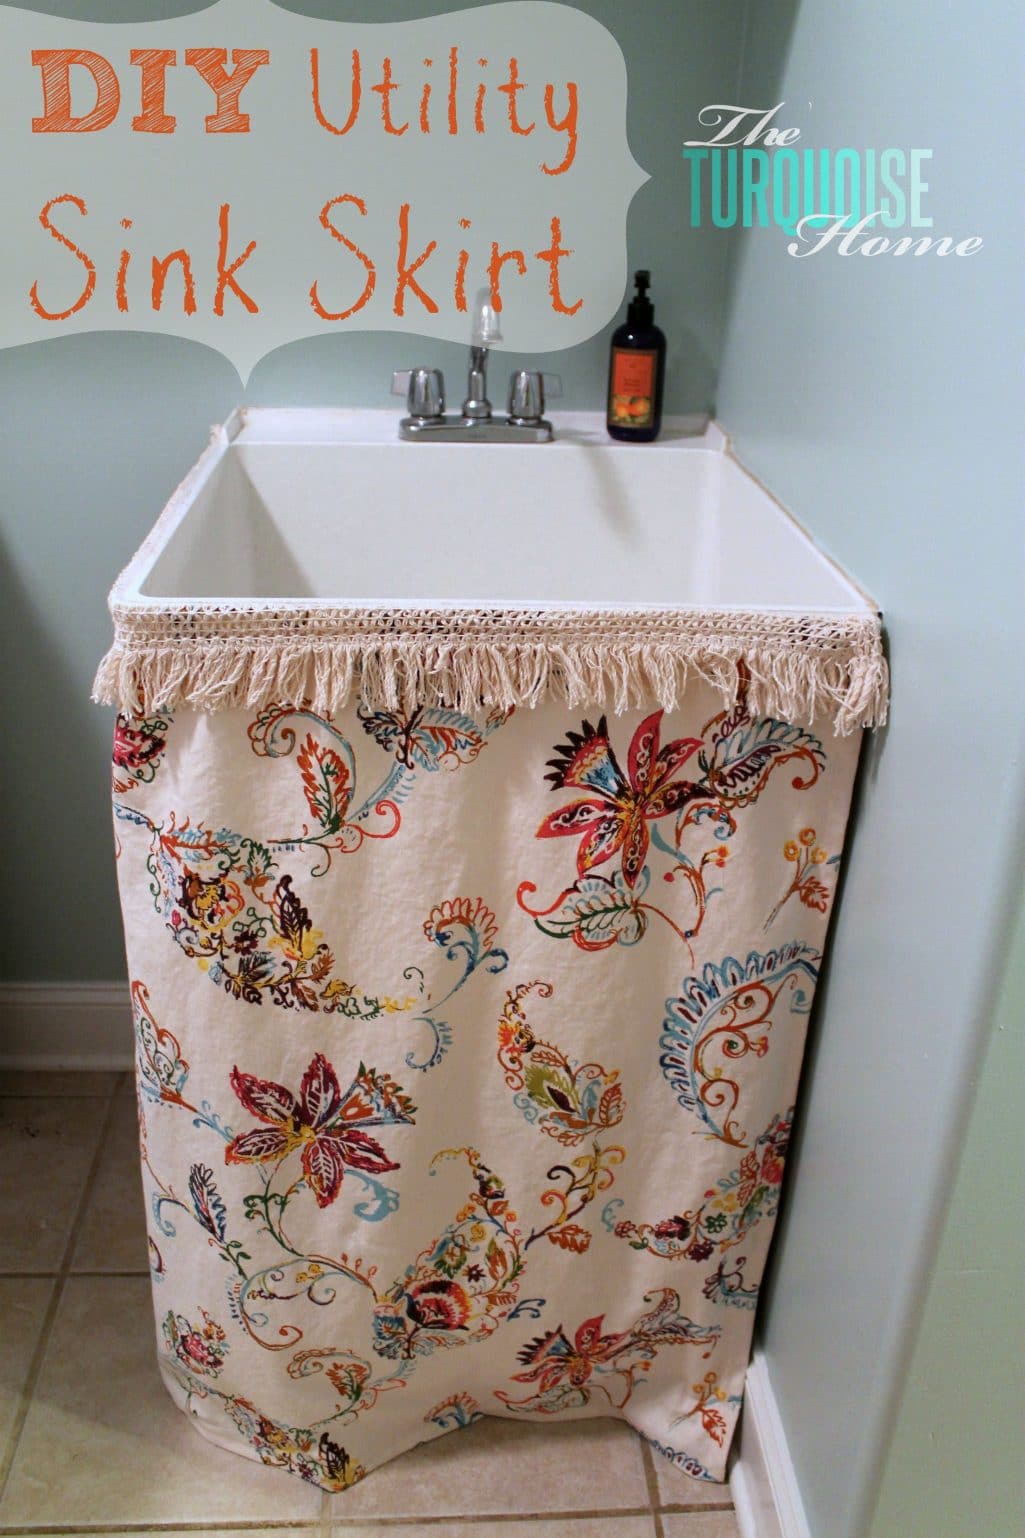 How To Make A Utility Sink Skirt The